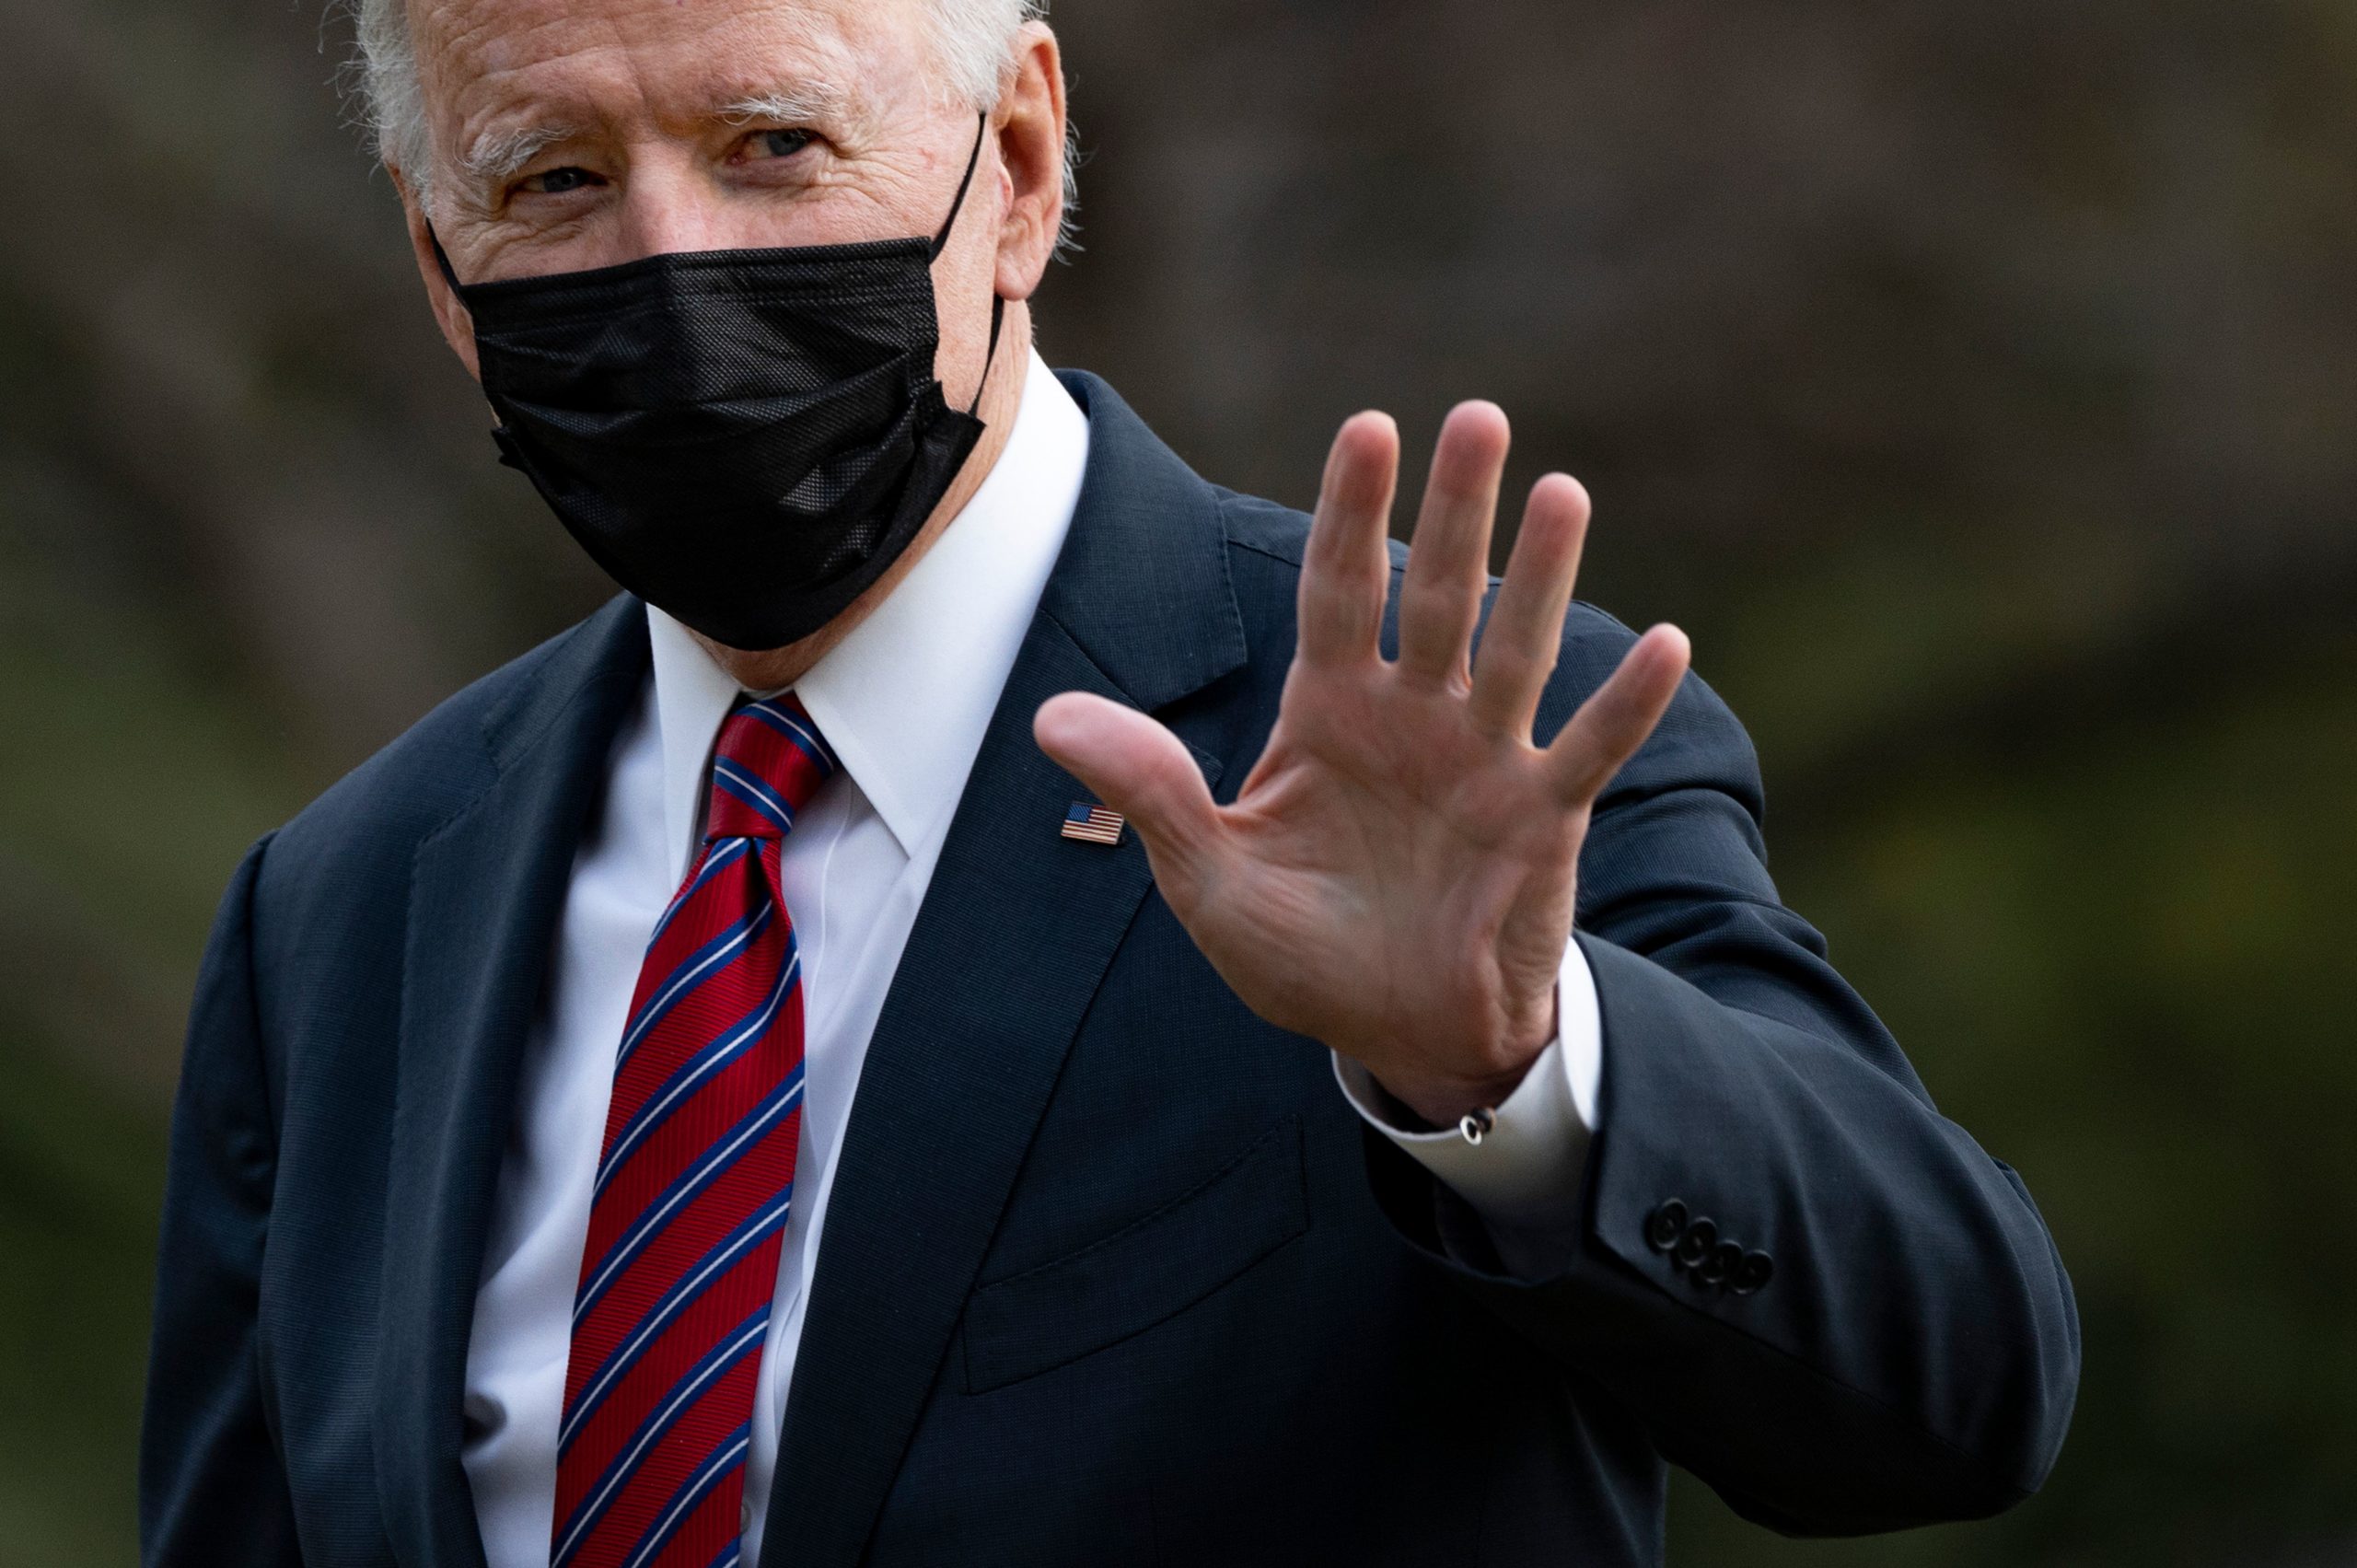 US President Joe Biden waves as he arrives at the White House in Washington, DC, on January 29, 2021. - Biden visited on Friday wounded military members and a coronavirus vaccine site at Walter Reed National Military Medical Center in Bethesda, Maryland. (Photo by JIM WATSON/AFP via Getty Images)